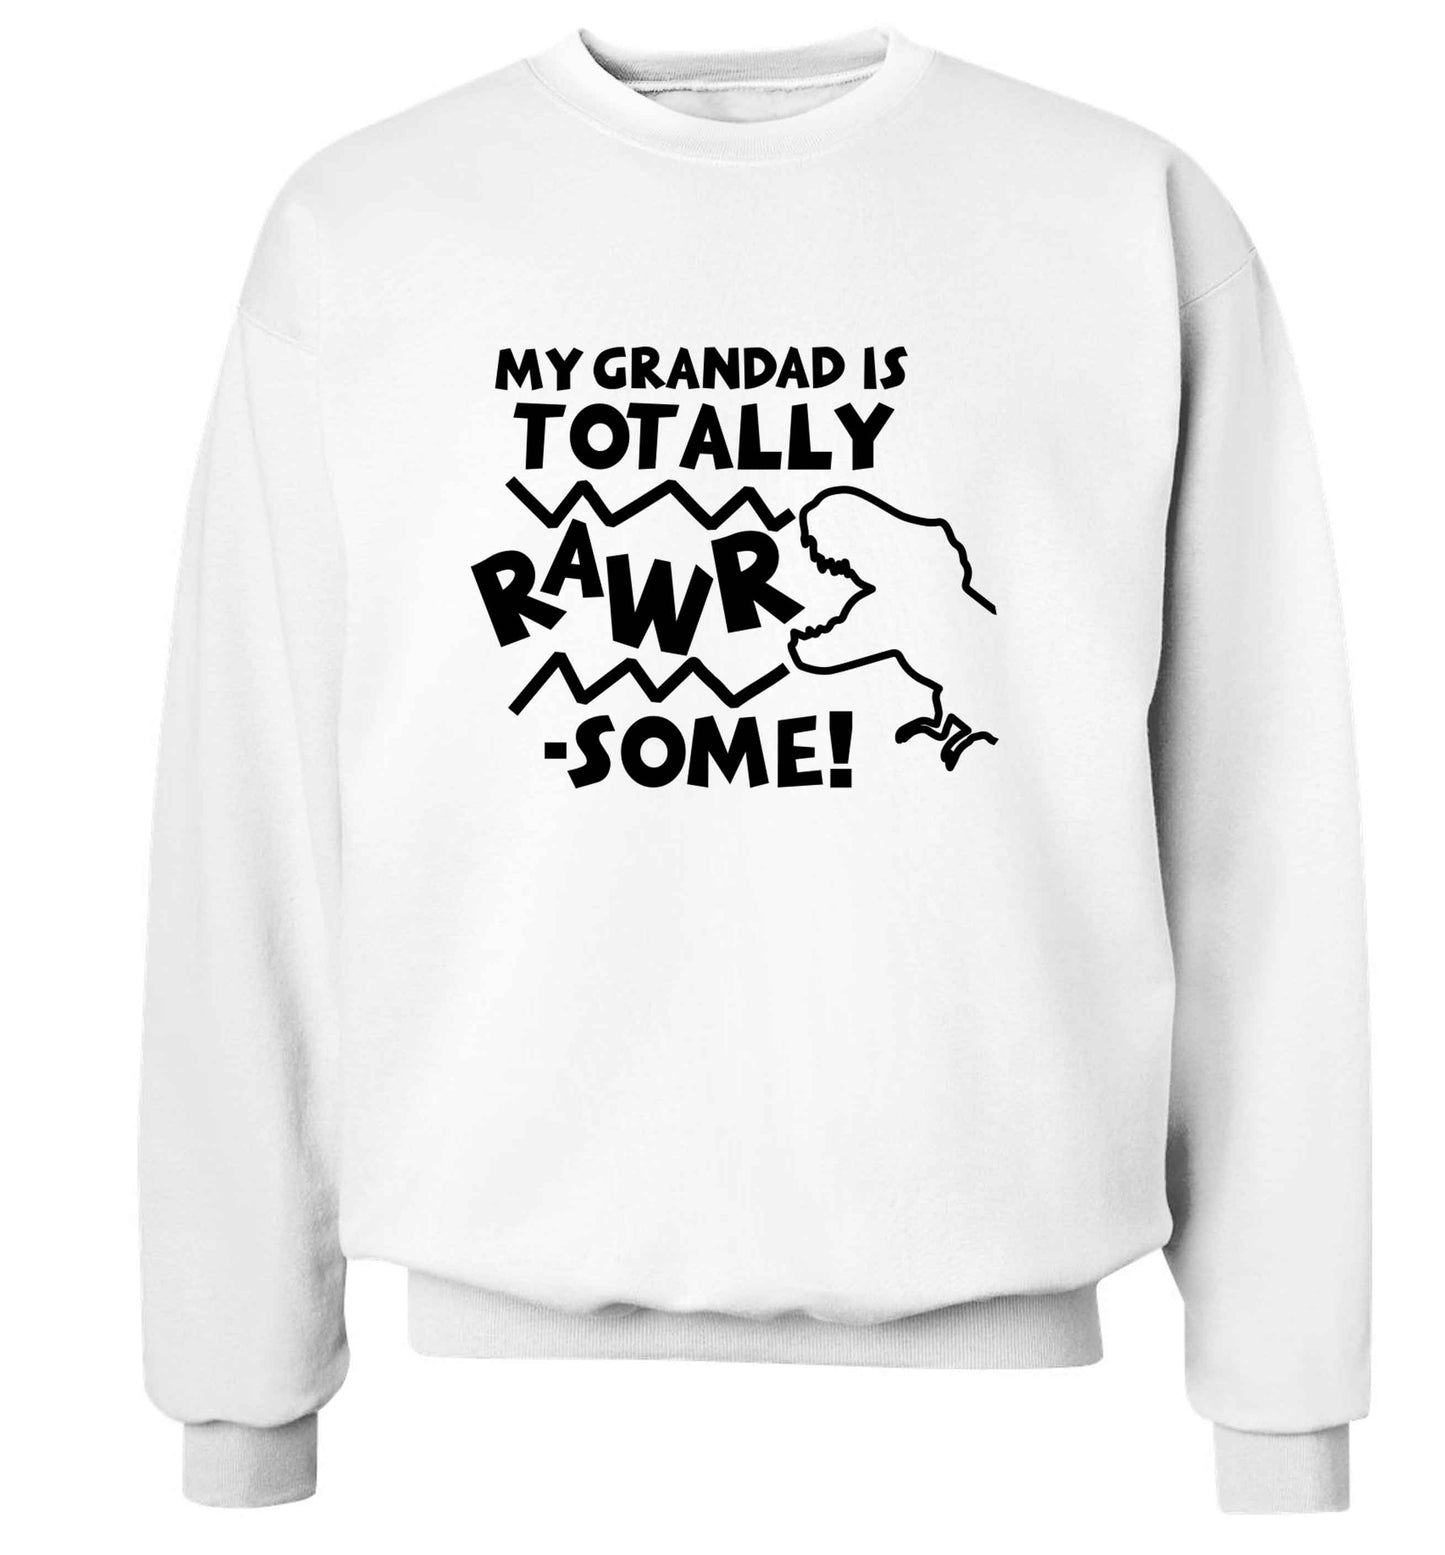 My grandad is totally rawrsome adult's unisex white sweater 2XL